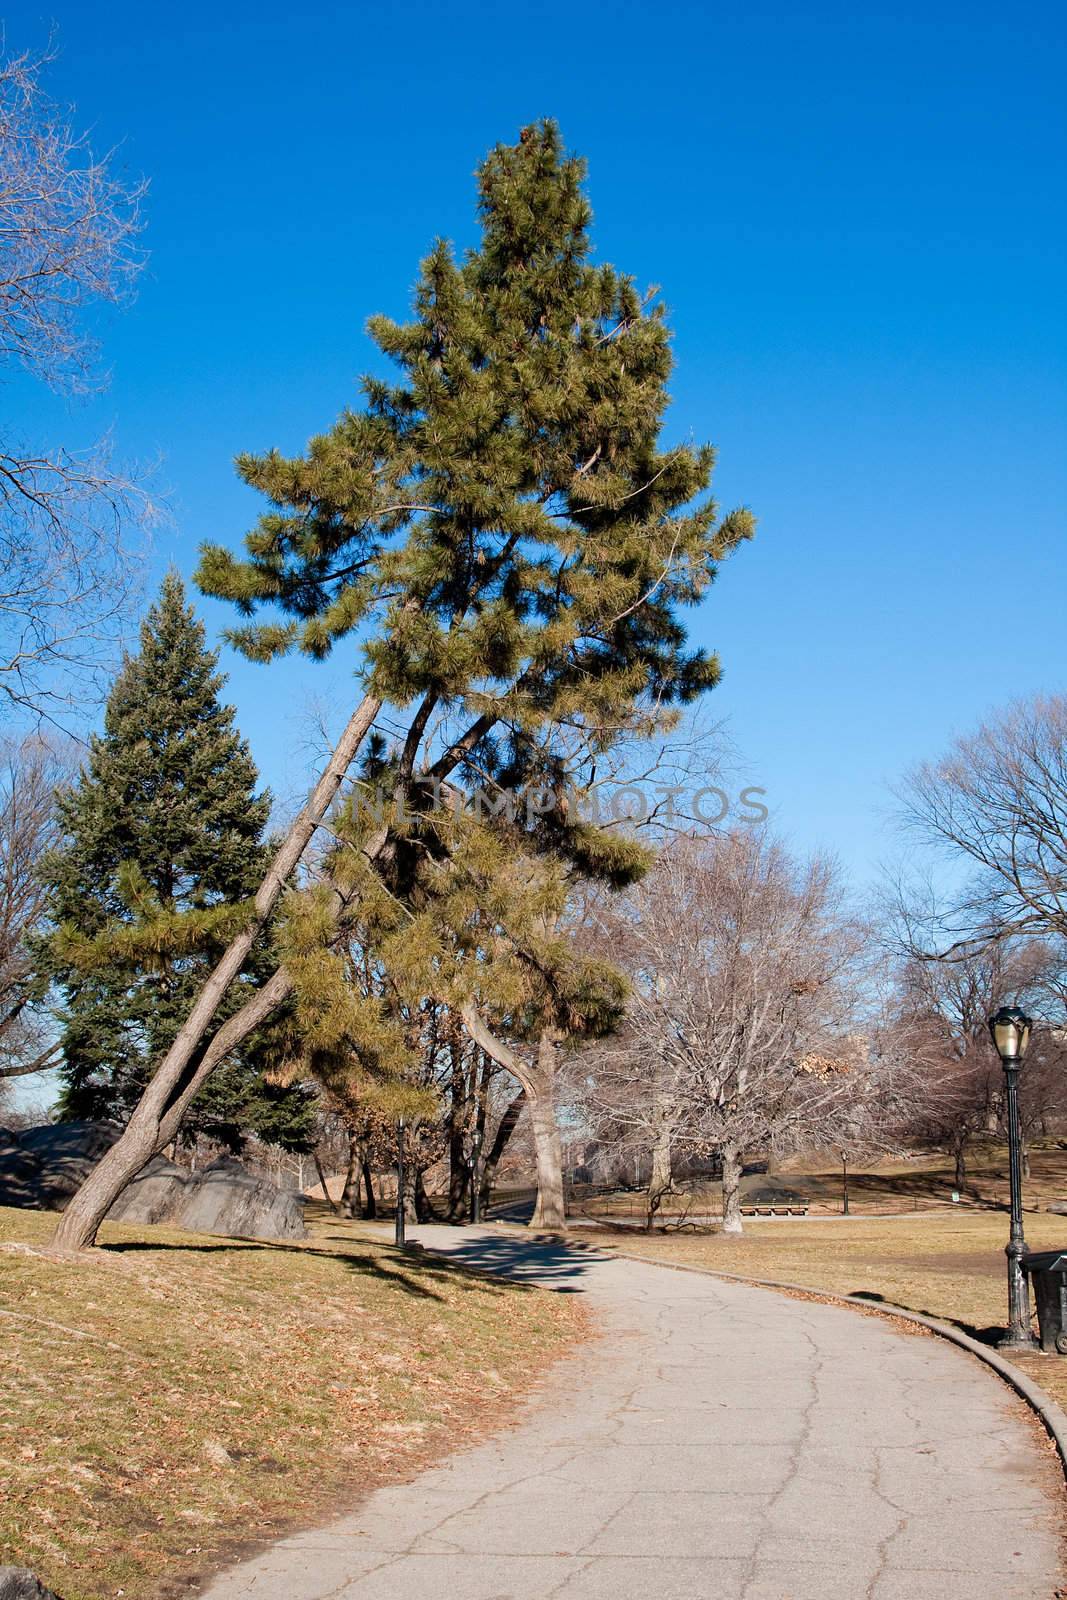 Paved walkway through a par during winter with bare trees without leaves and tilted evergreen, under a deep blue sky.